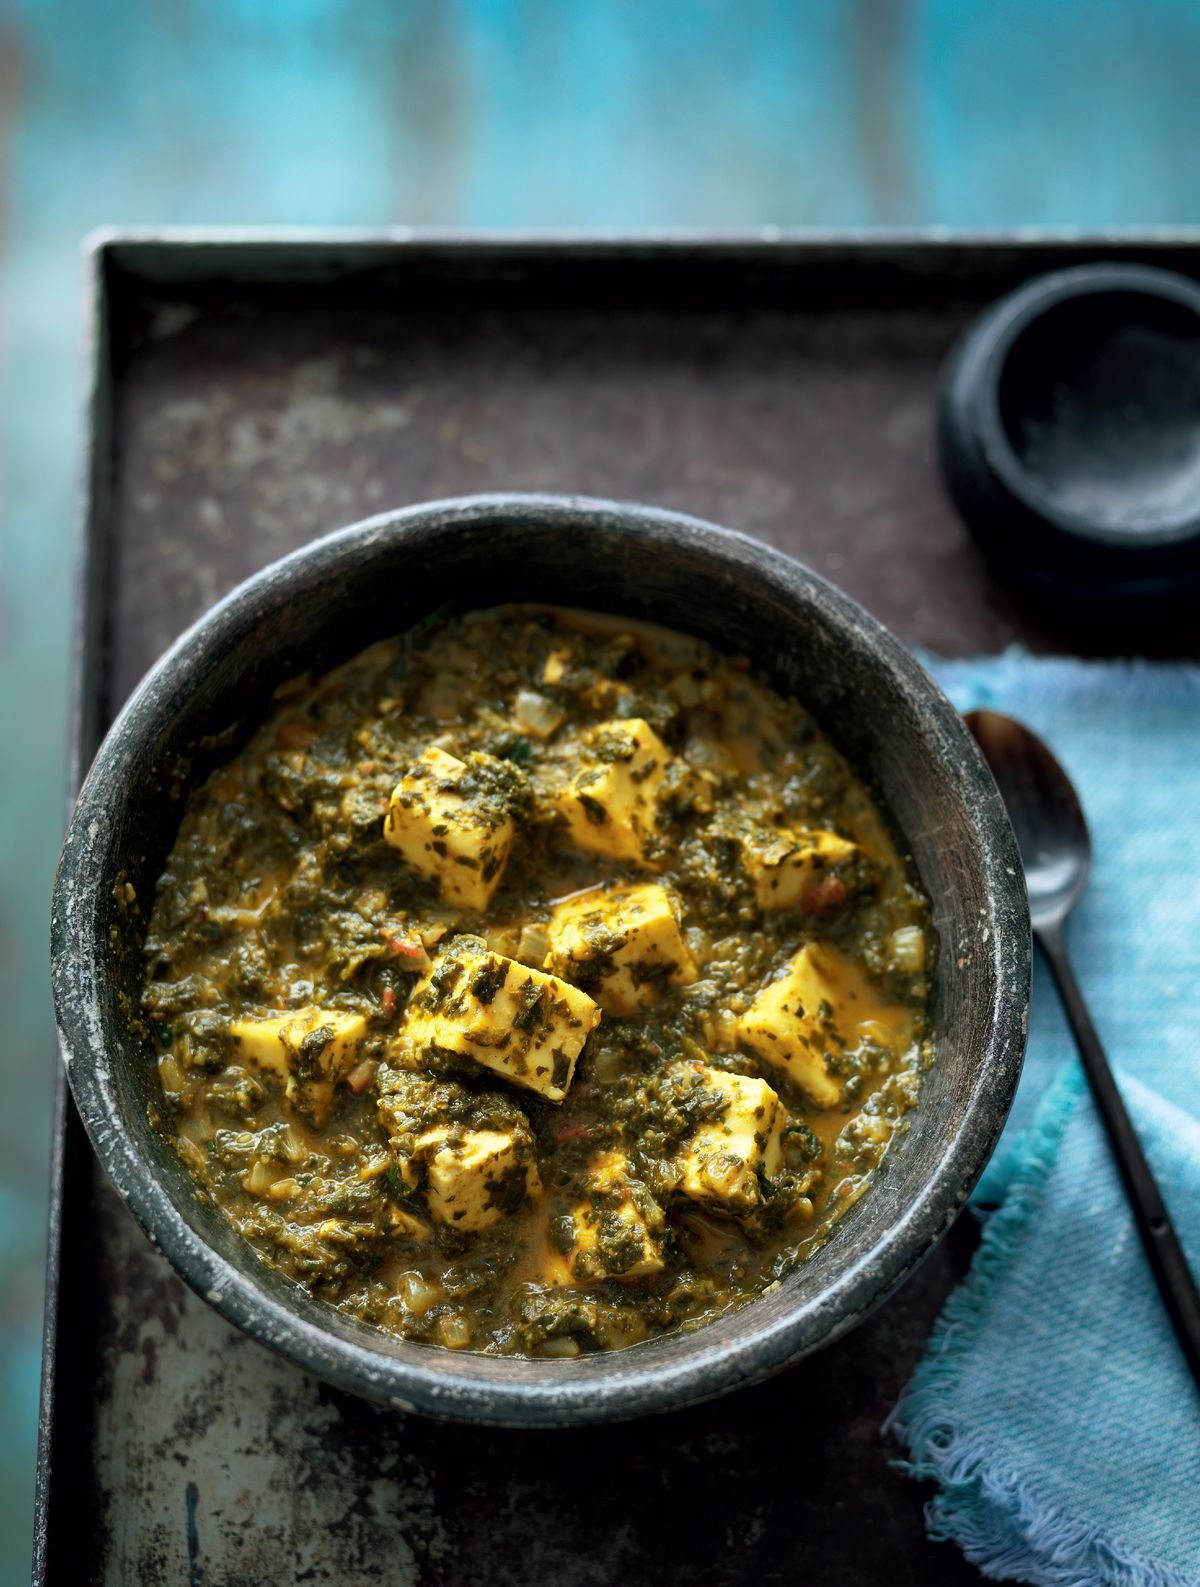 Spinach with Fresh Indian Cheese (Saag Paneer)